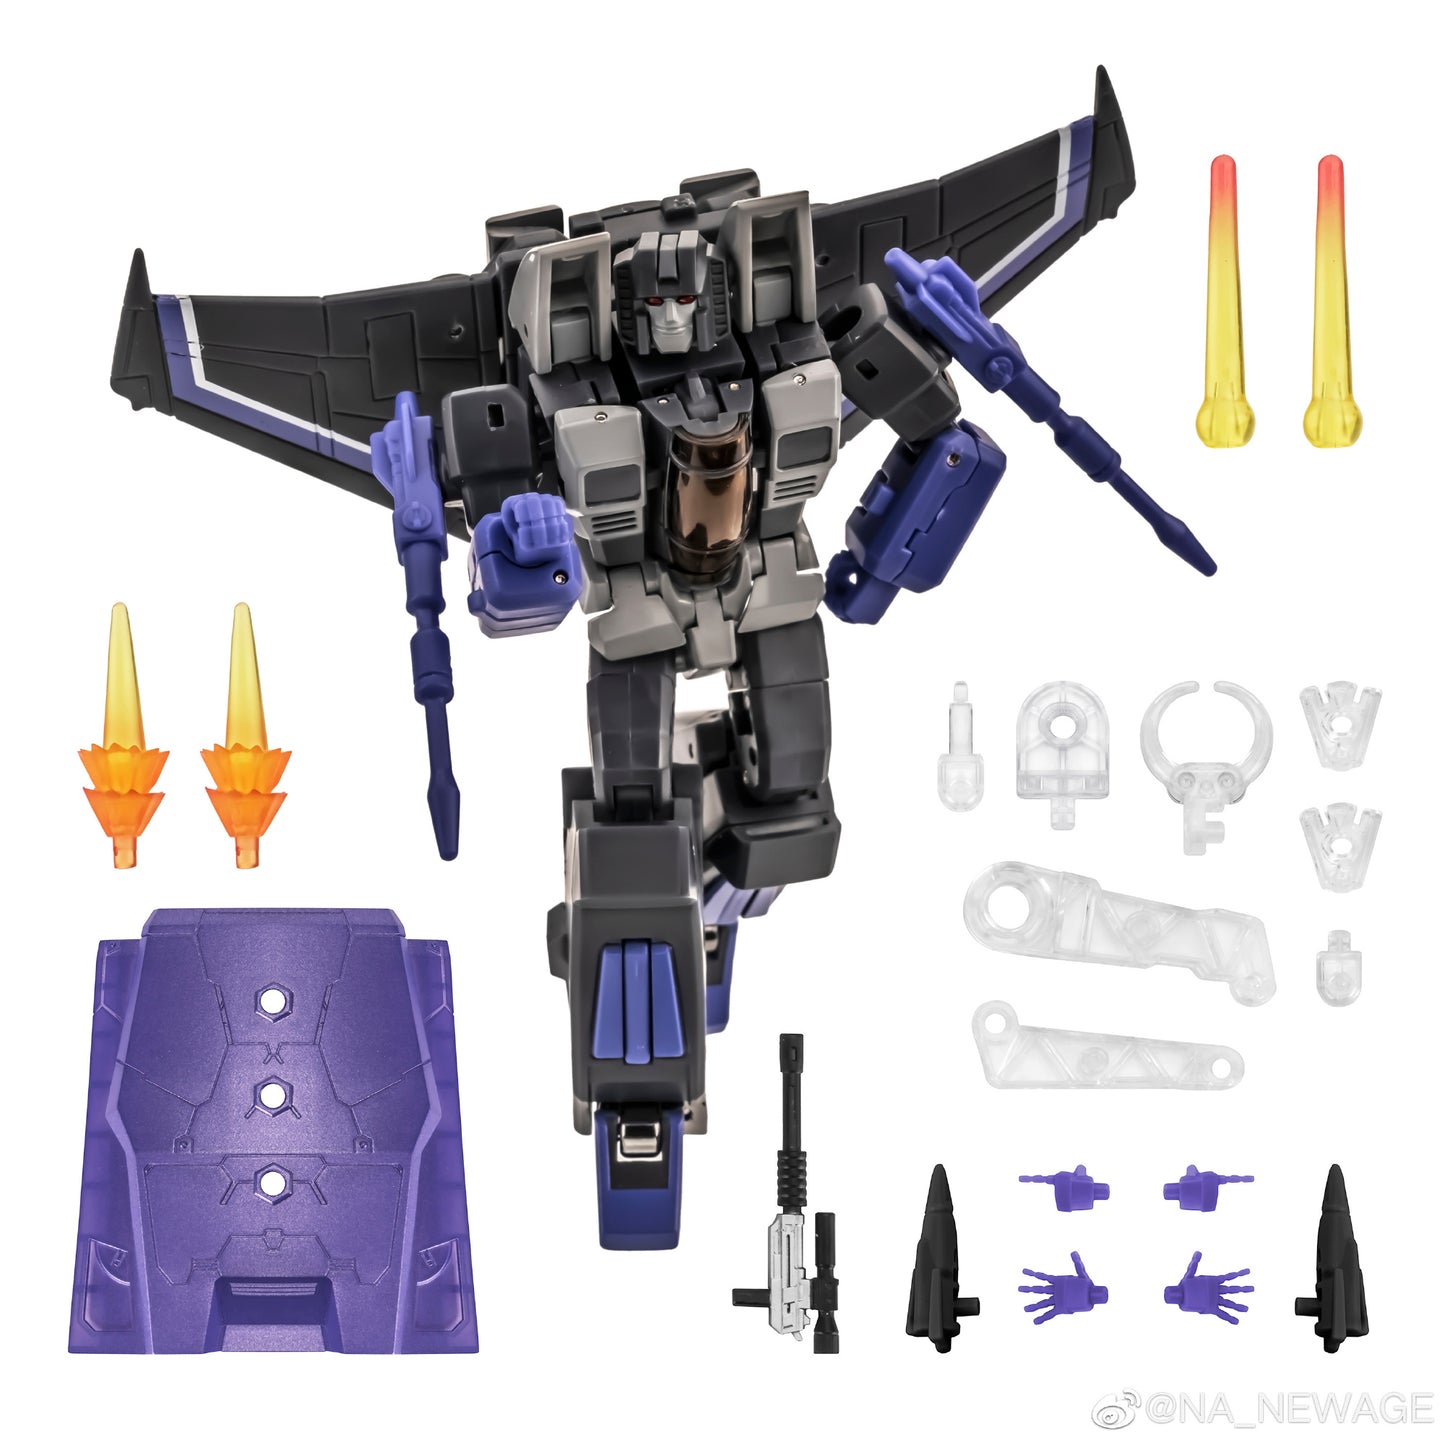 NA H15C Samael is a mini fighter jet from Newage and is able to convert into a battling robot figure. Samael includes a flight display stand and several accessories.